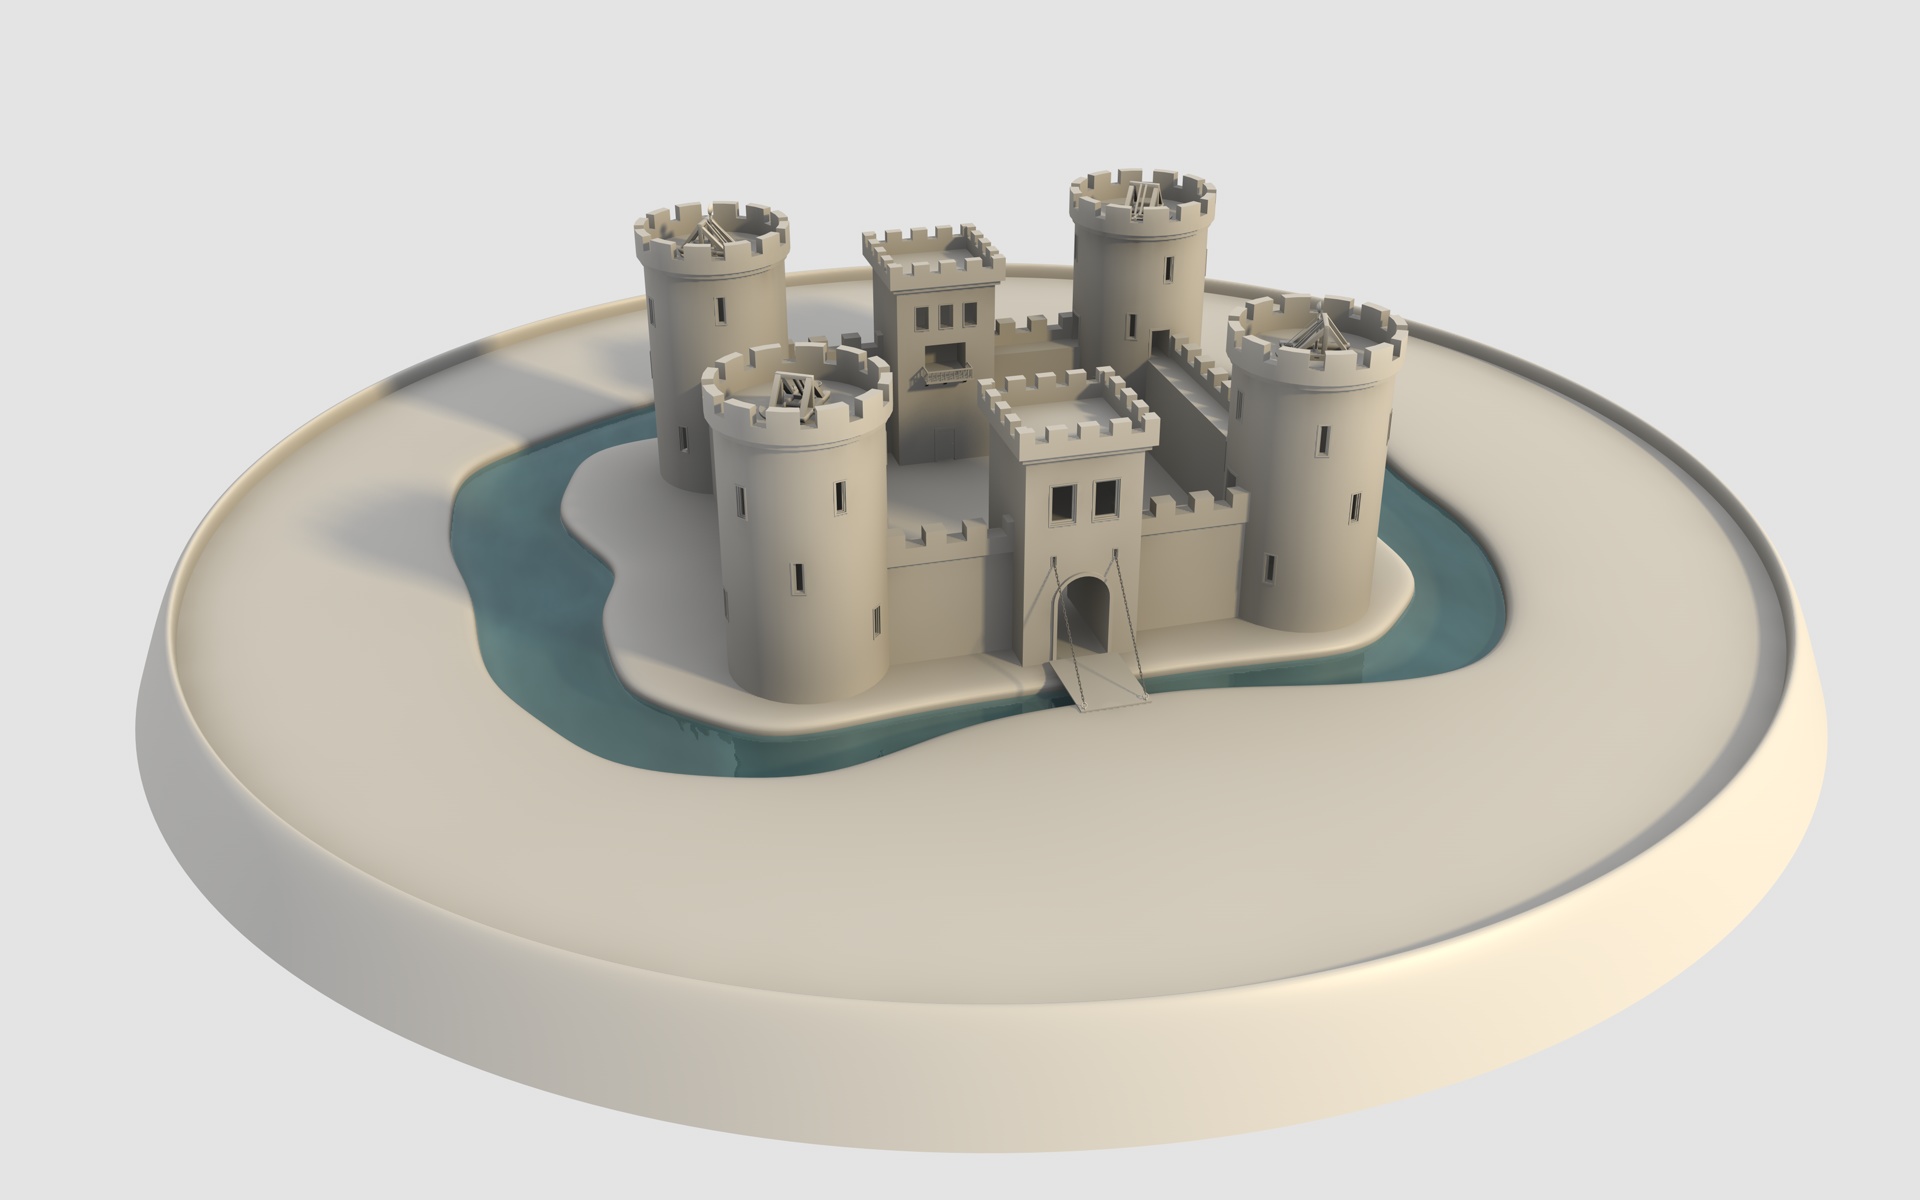 Crooked castle - wip